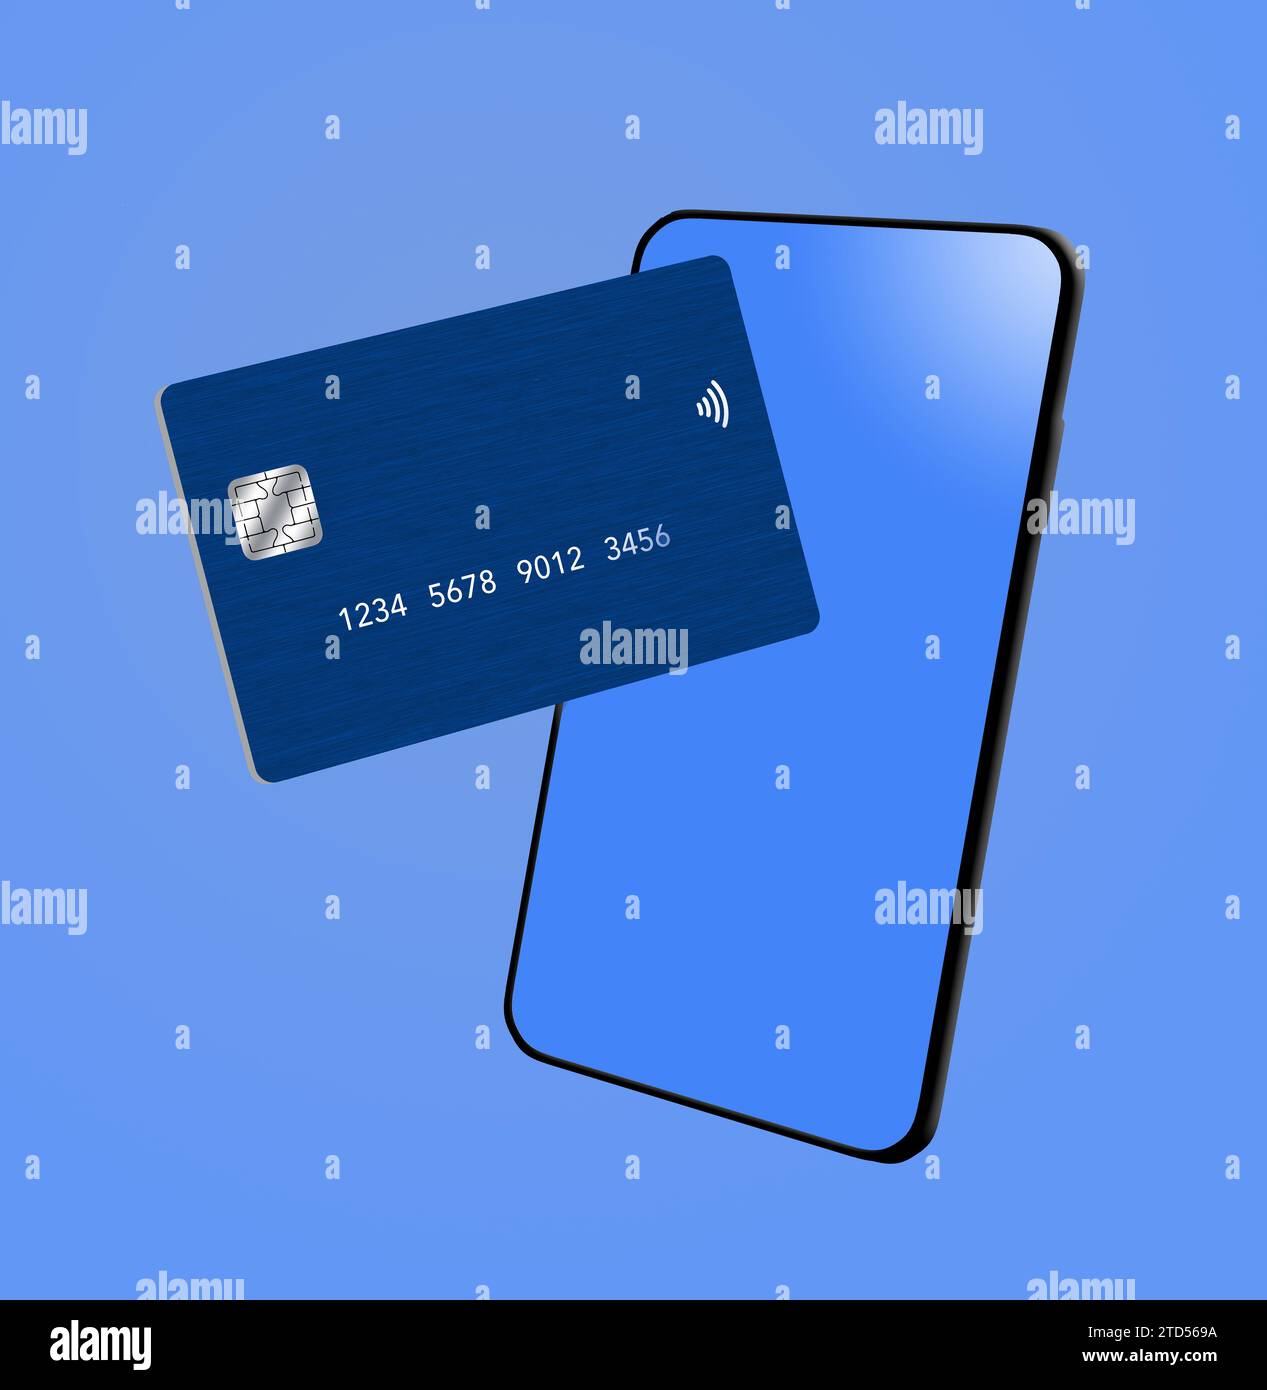 A generic  blue credit card is seen with a modern sleek mobile phone with a blue screen and all on a blue background in a 3-d illustration. Stock Photo